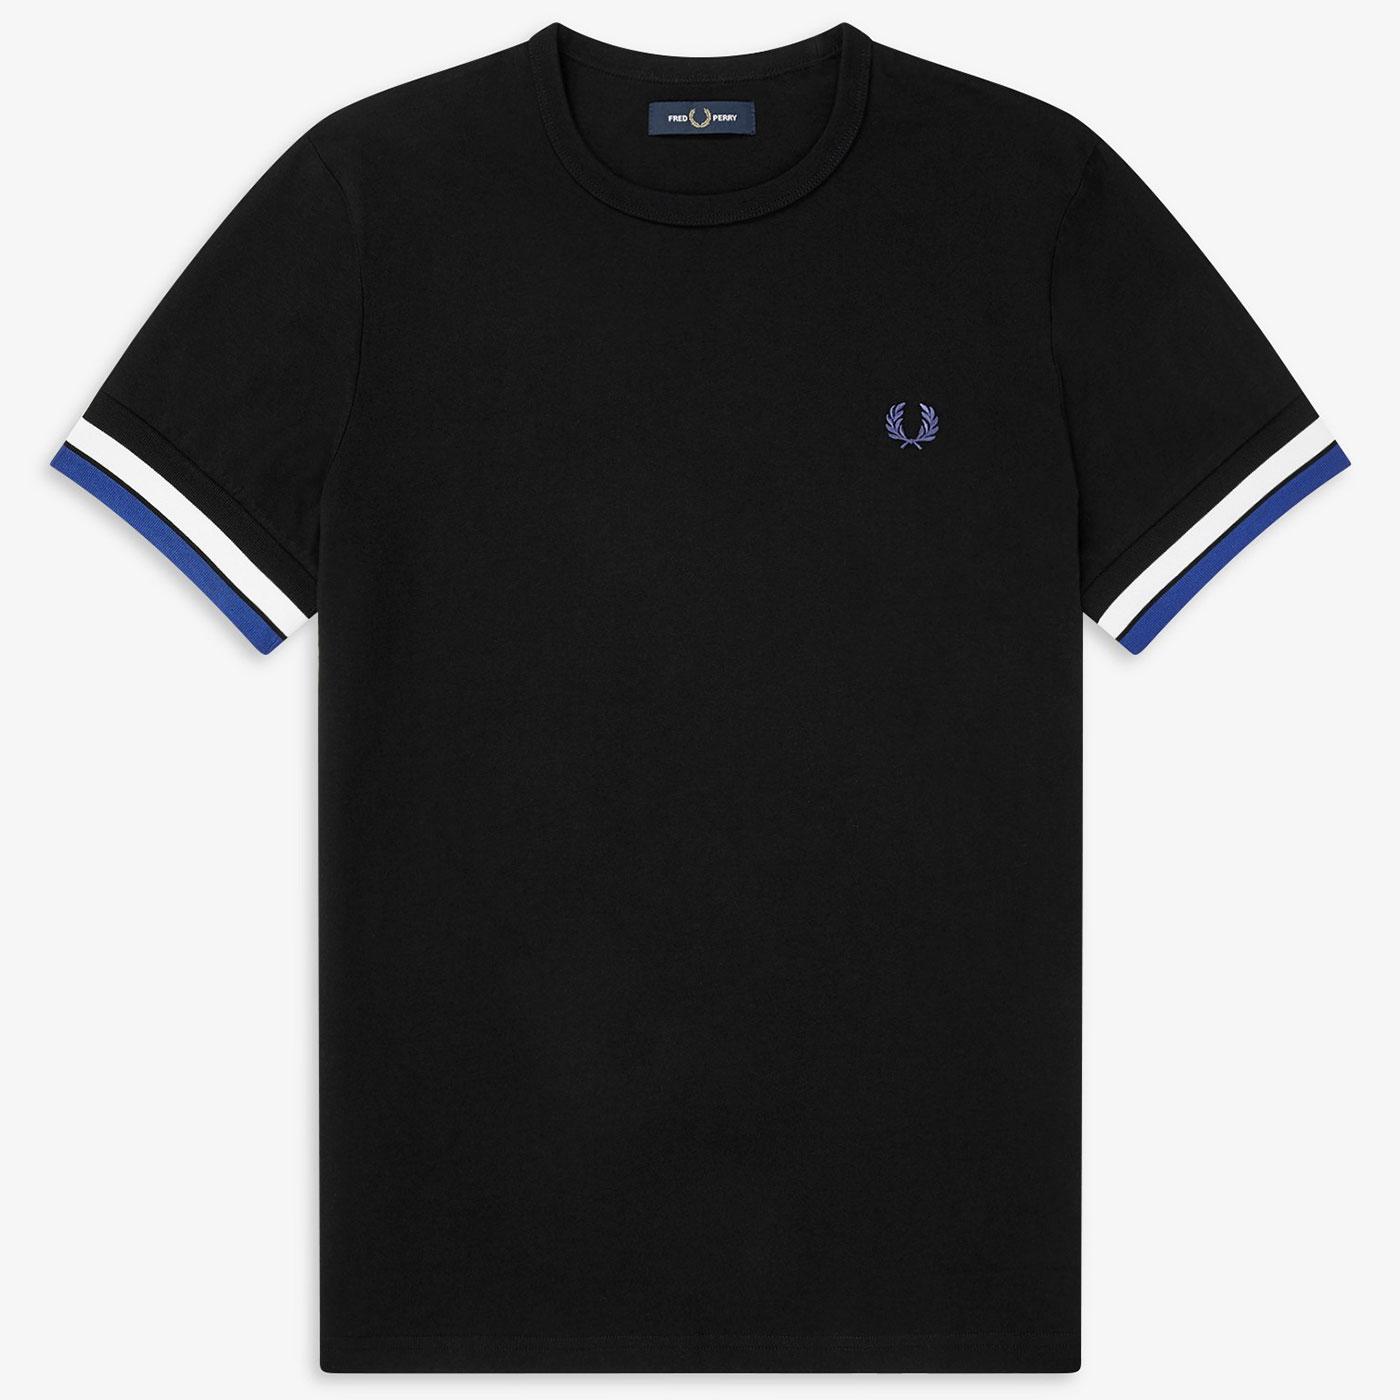 FRED PERRY Men's Retro Bold Tipped T-Shirt BLACK